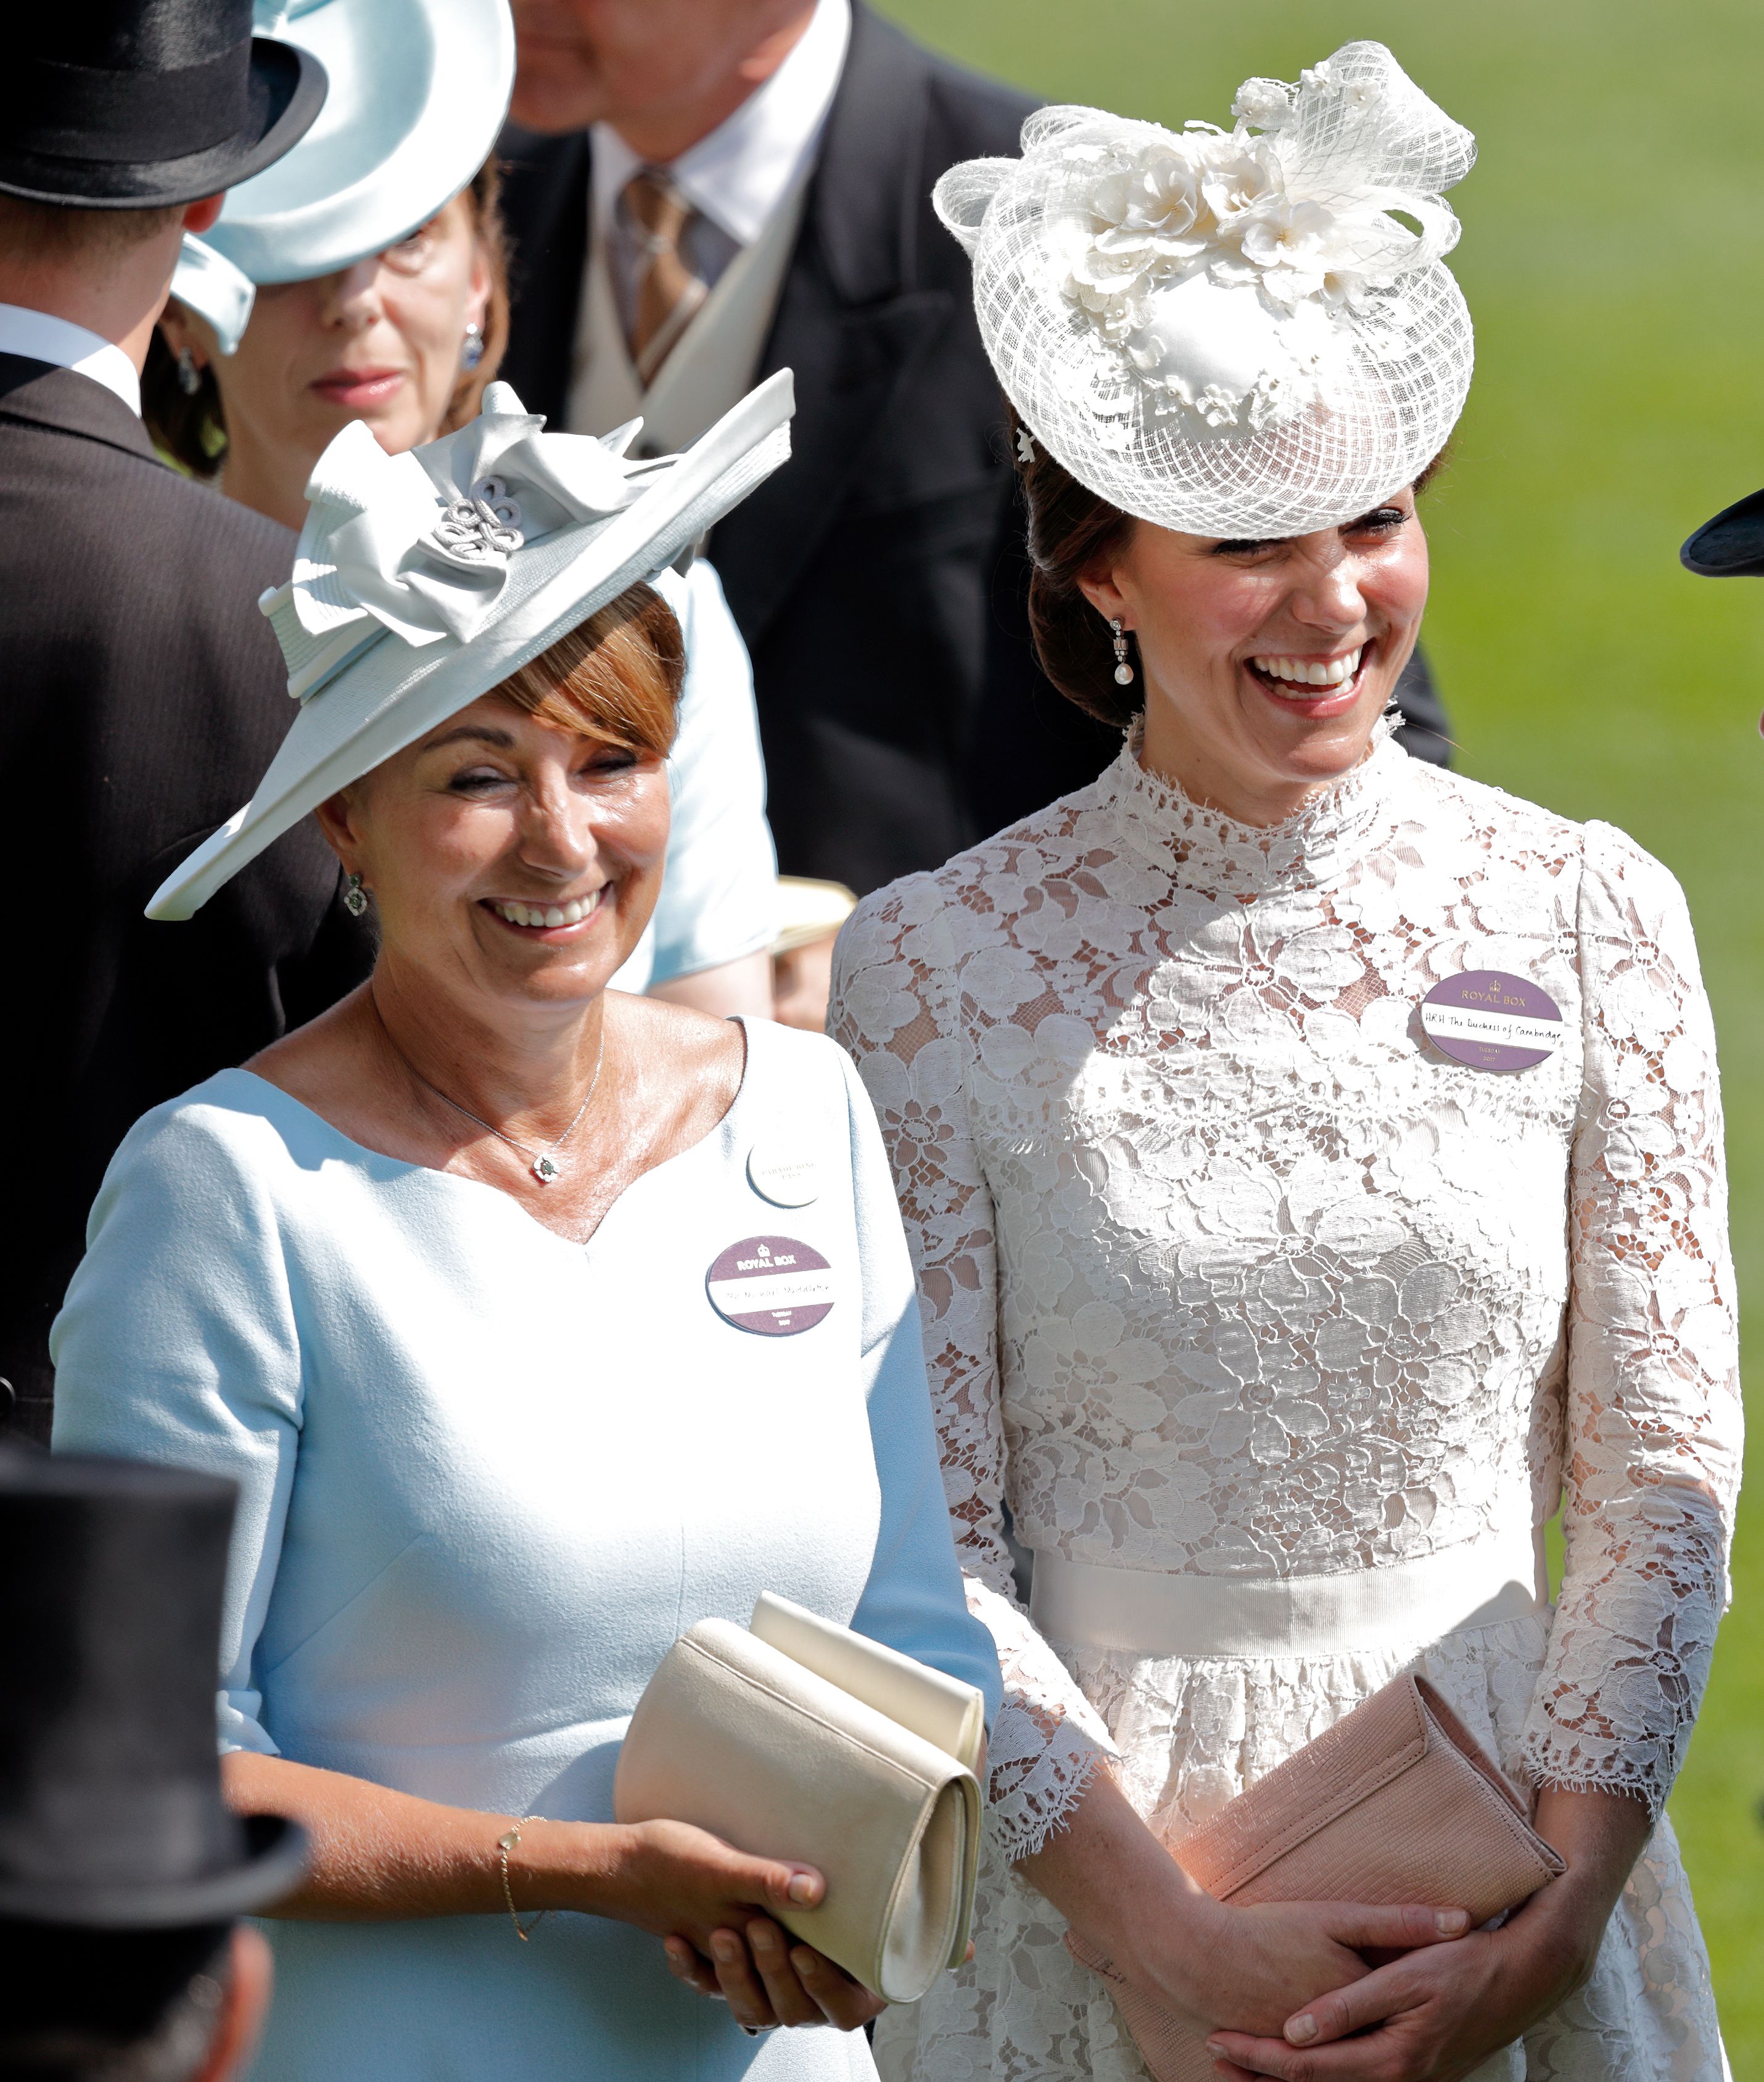 Kate Middleton and her mother Carole Middleton attend day 1 of Royal Ascot at Ascot Racecourse on June 20, 2017 in Ascot, England. | Photo: Getty Images